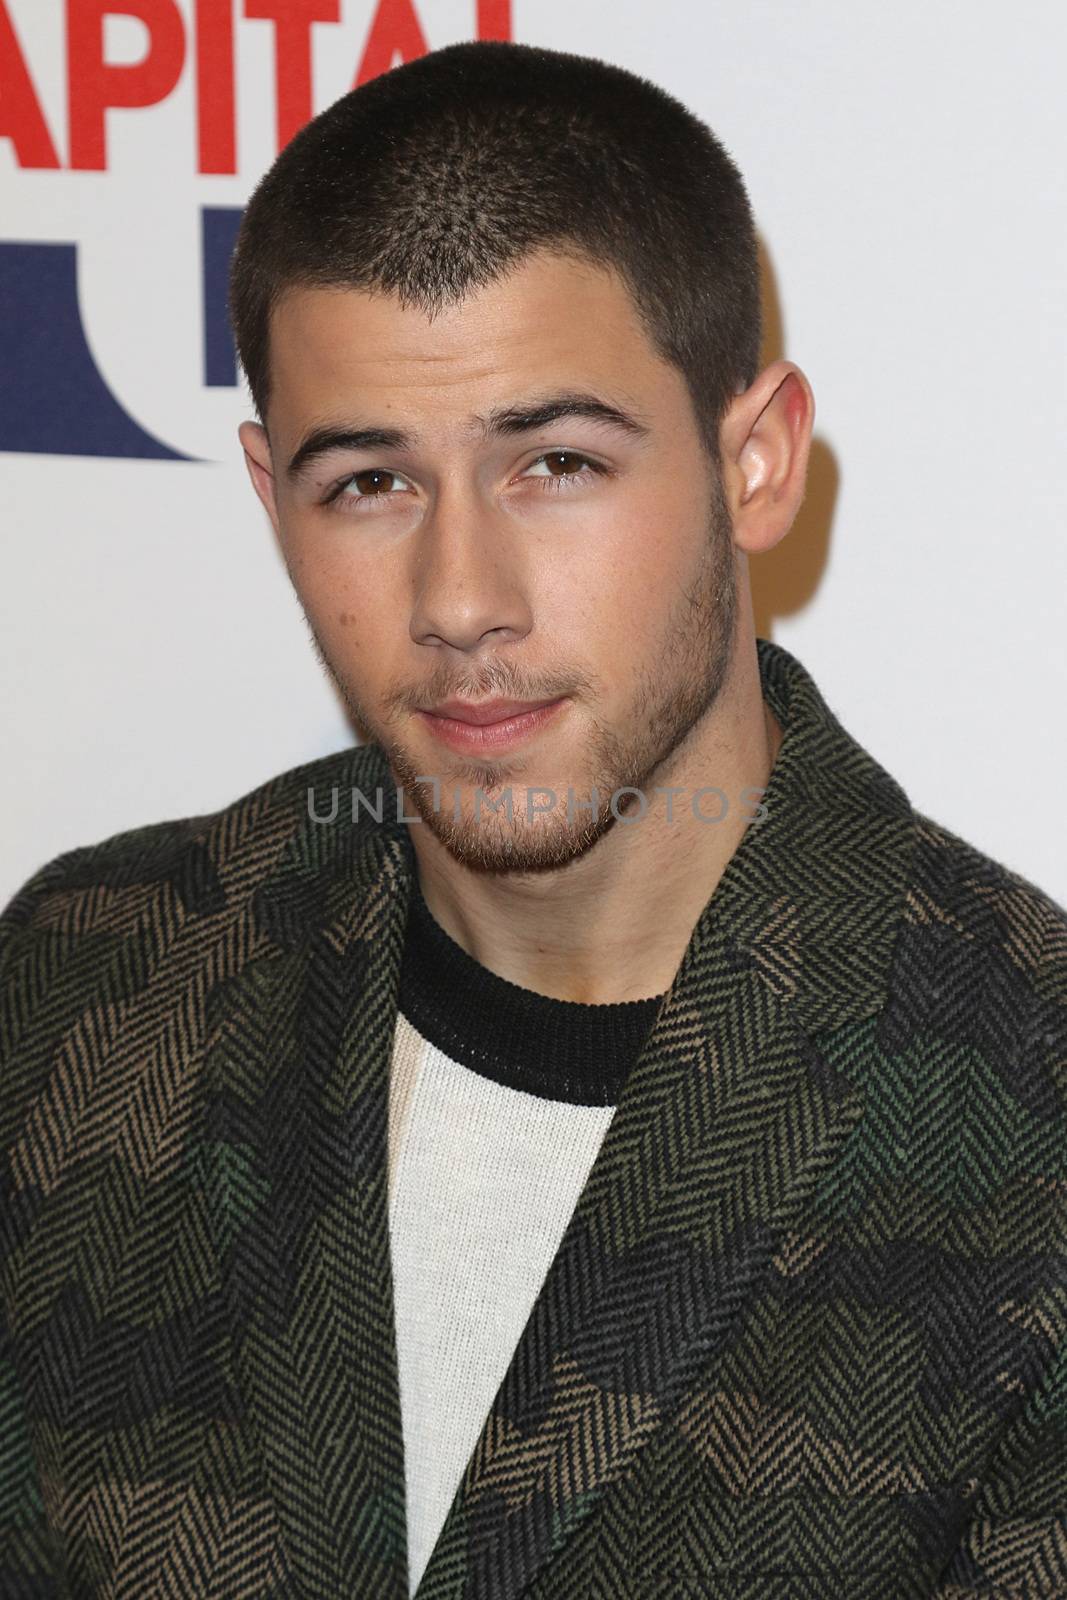 UNITED KINGDOM, London: Nick Jonas attends the Capital FM Jingle Bell Ball at 02 Arena in London on December 6, 2015. 